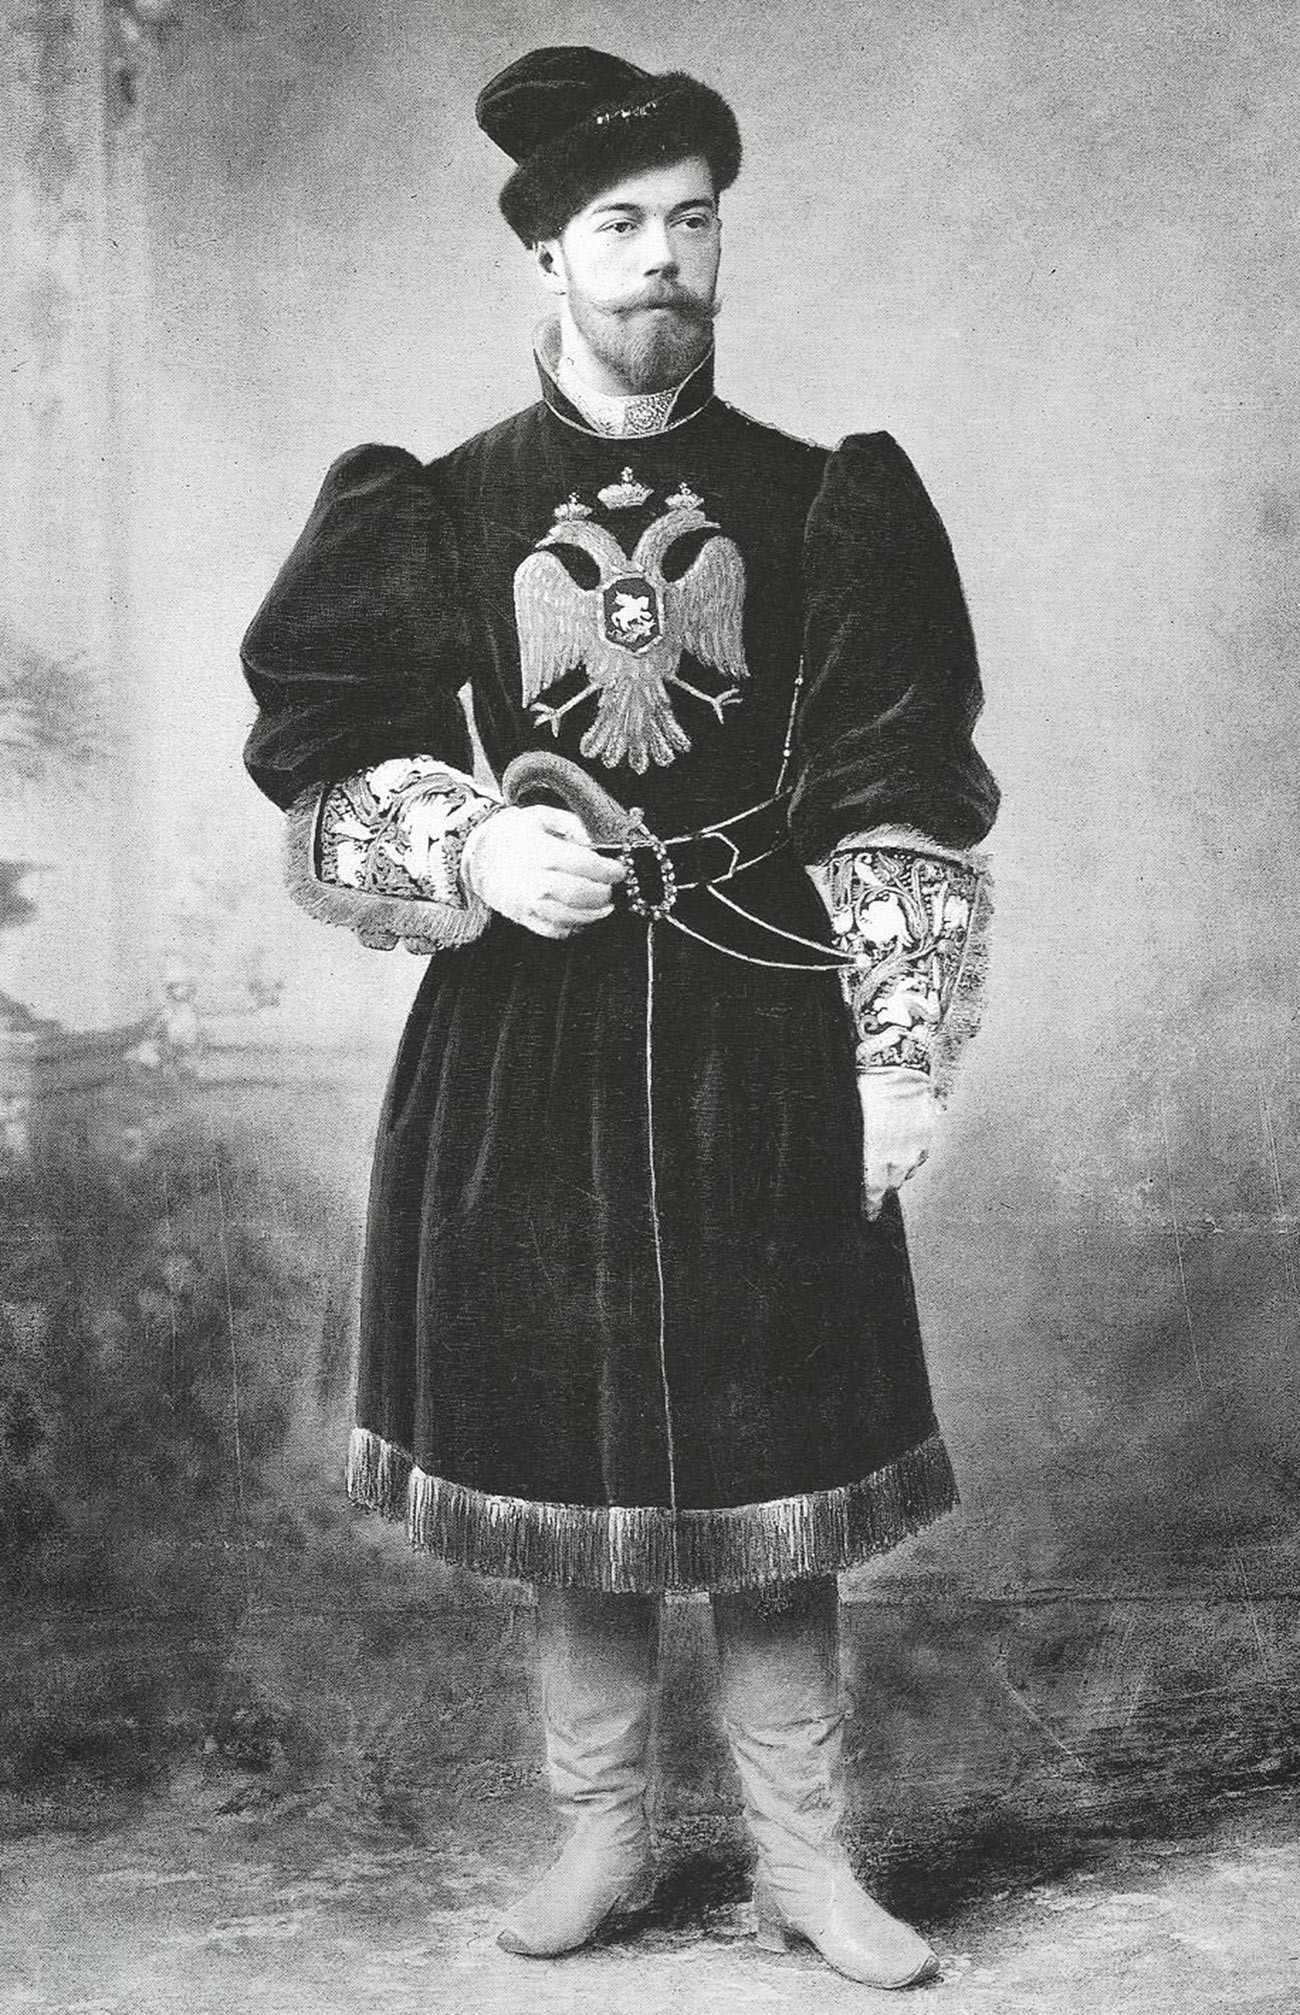 Nicholas II in 1913, wearing a traditional costume of Russian Grand Princes of the 17th century